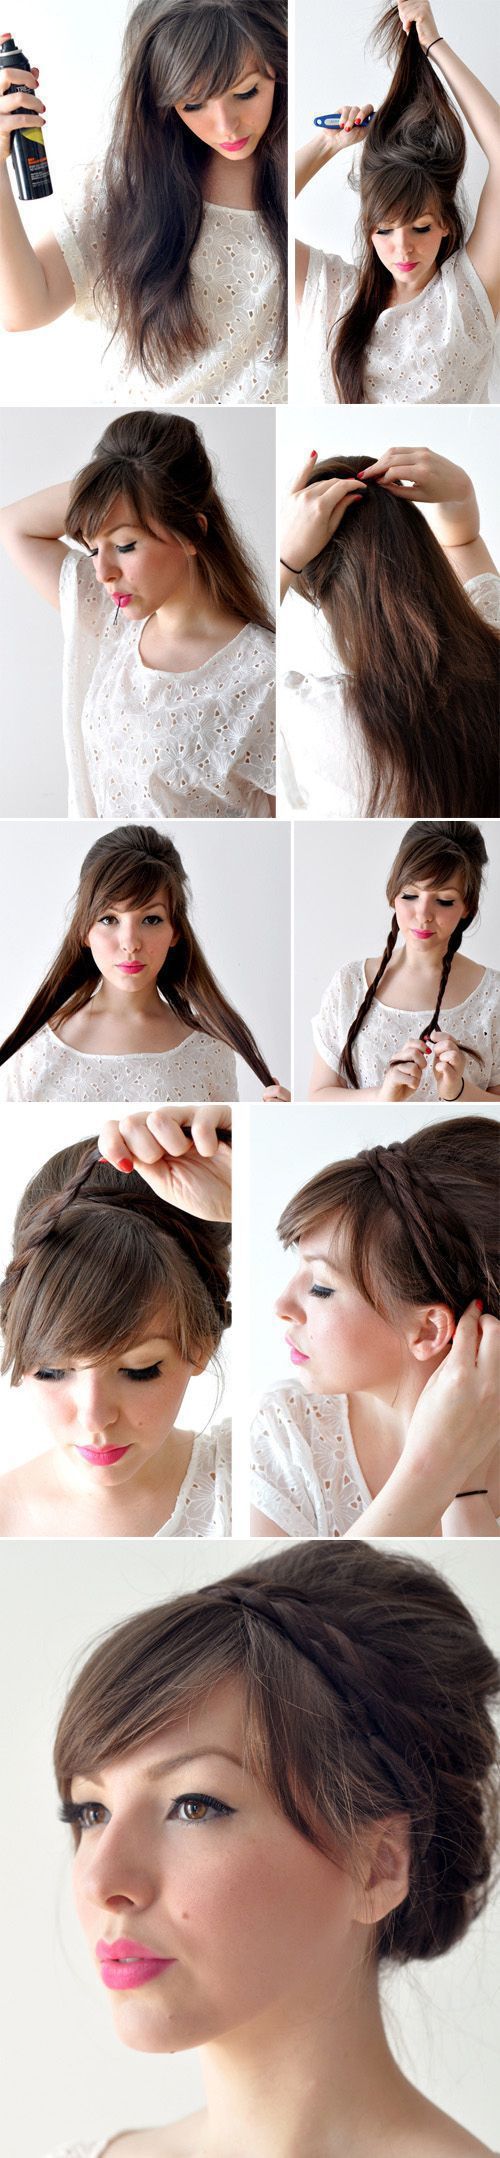 Creative Hairstyles That You Can Easily Do at Home (27 pics)